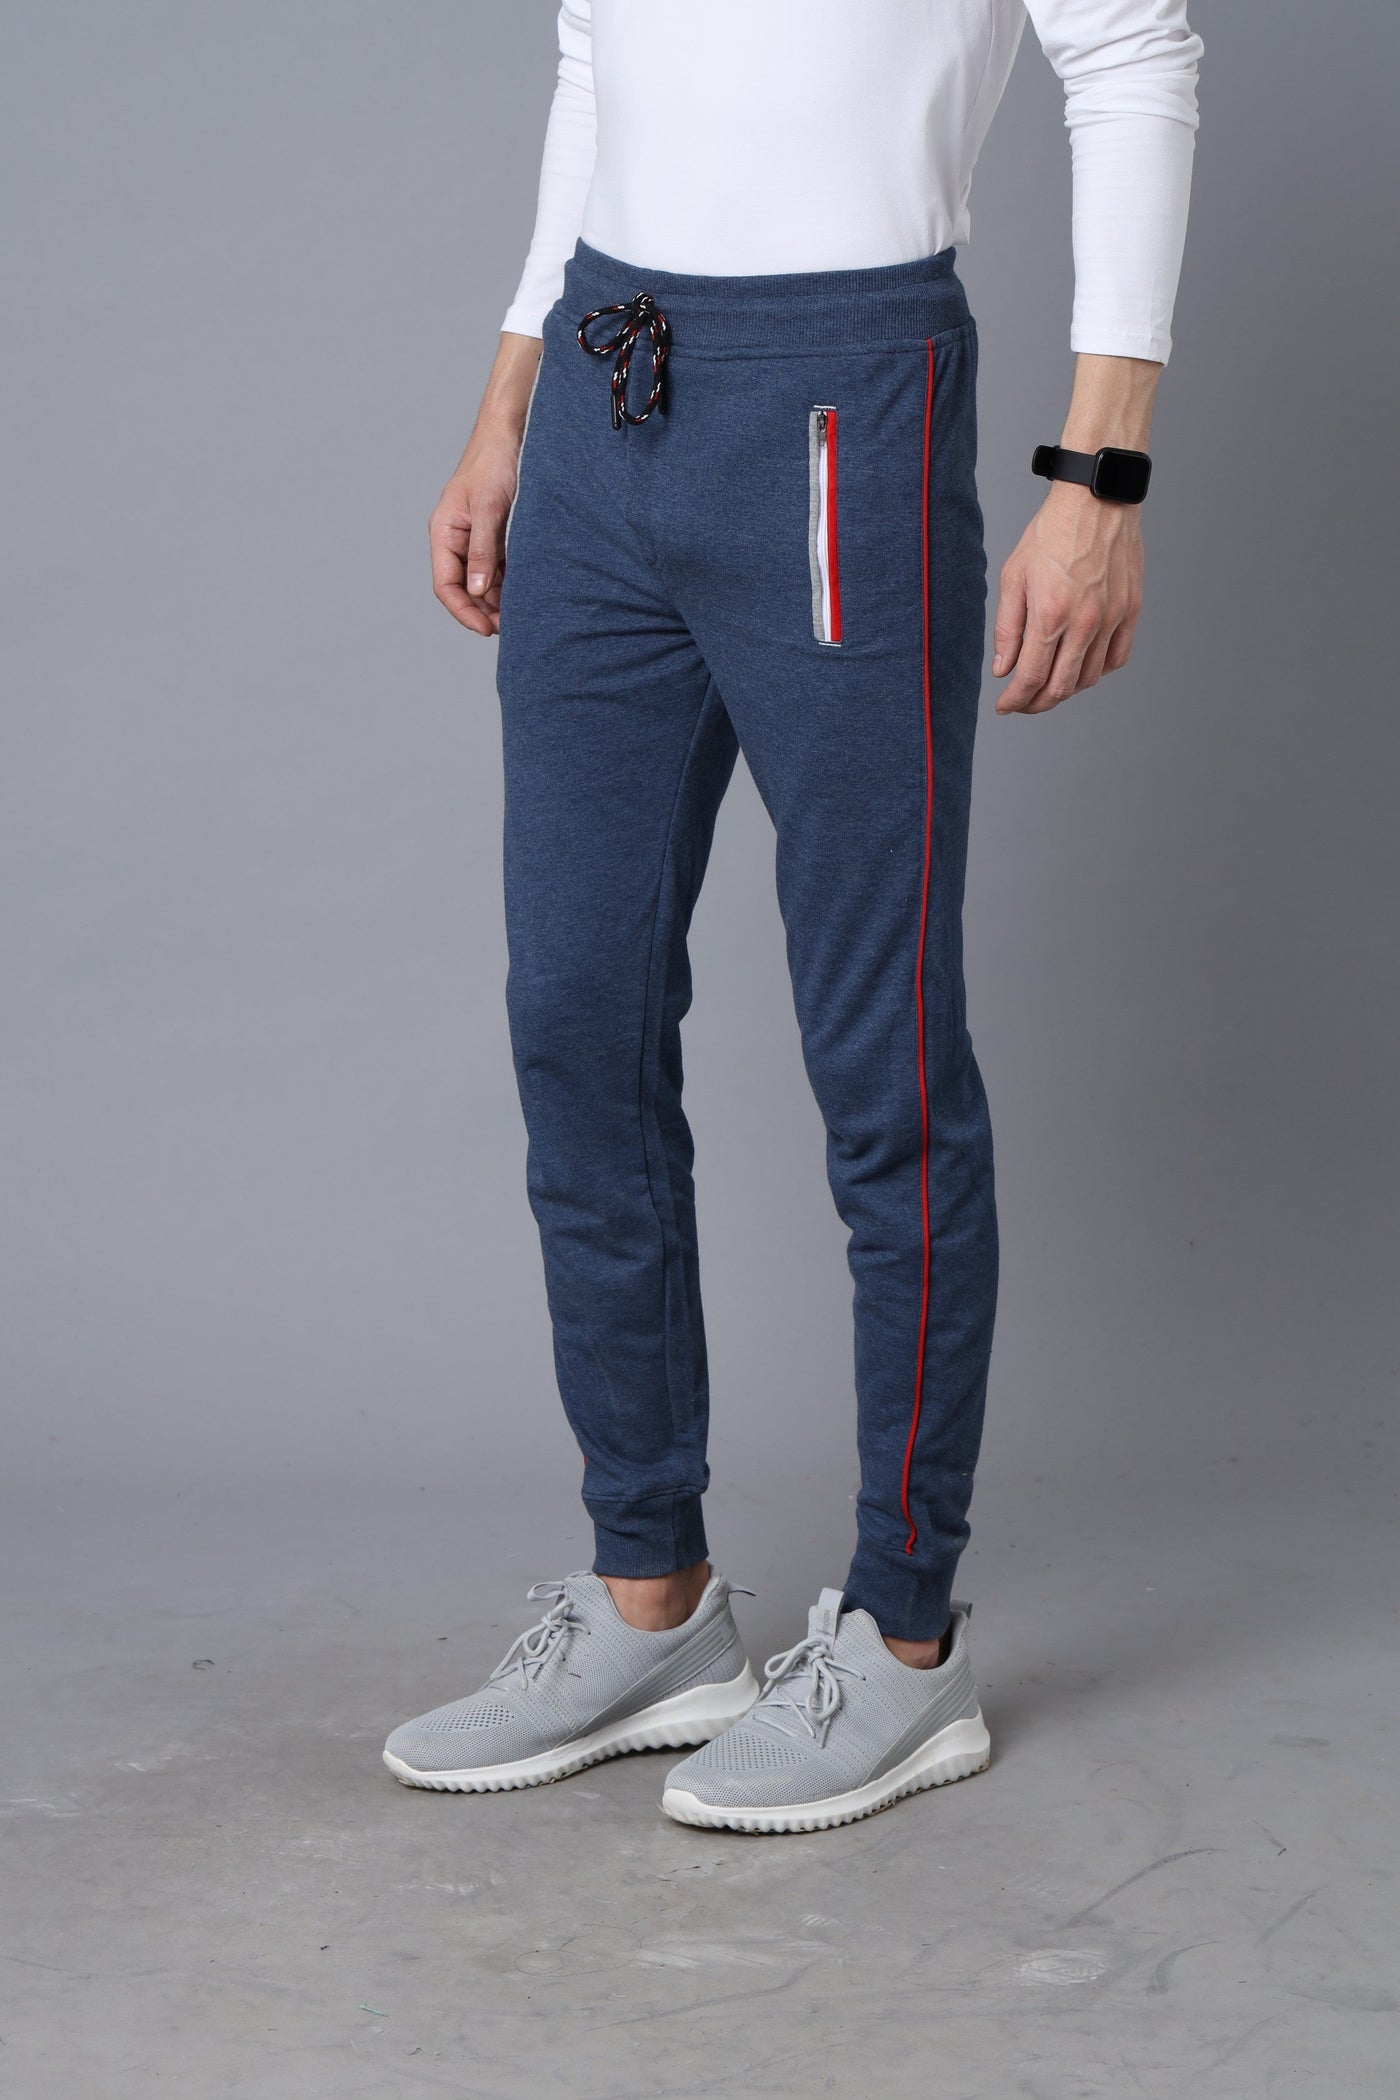 Blue track pants with zipper pockets